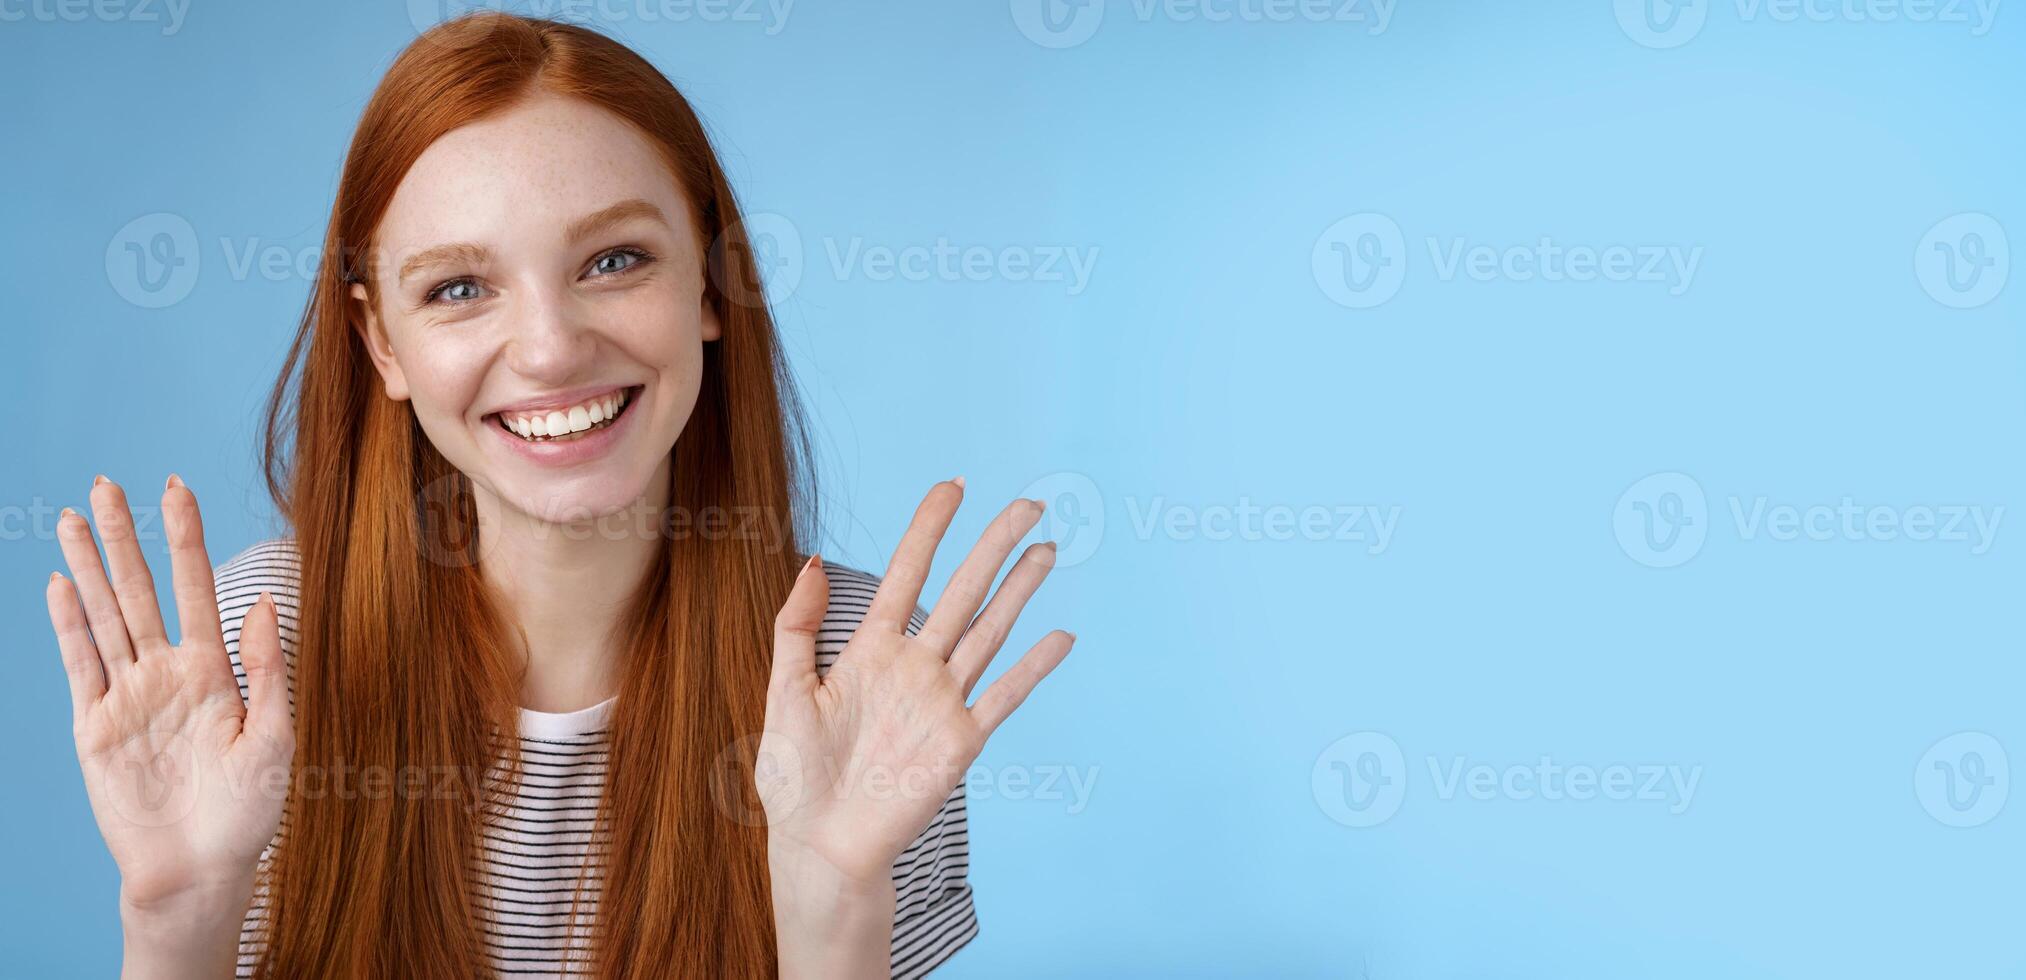 Charming redhead elder sister say goodbye sibling friends smiling cheerful waving raised palms show ten fingers grinning joyfully look carefree relaxed, talking casually blue background photo